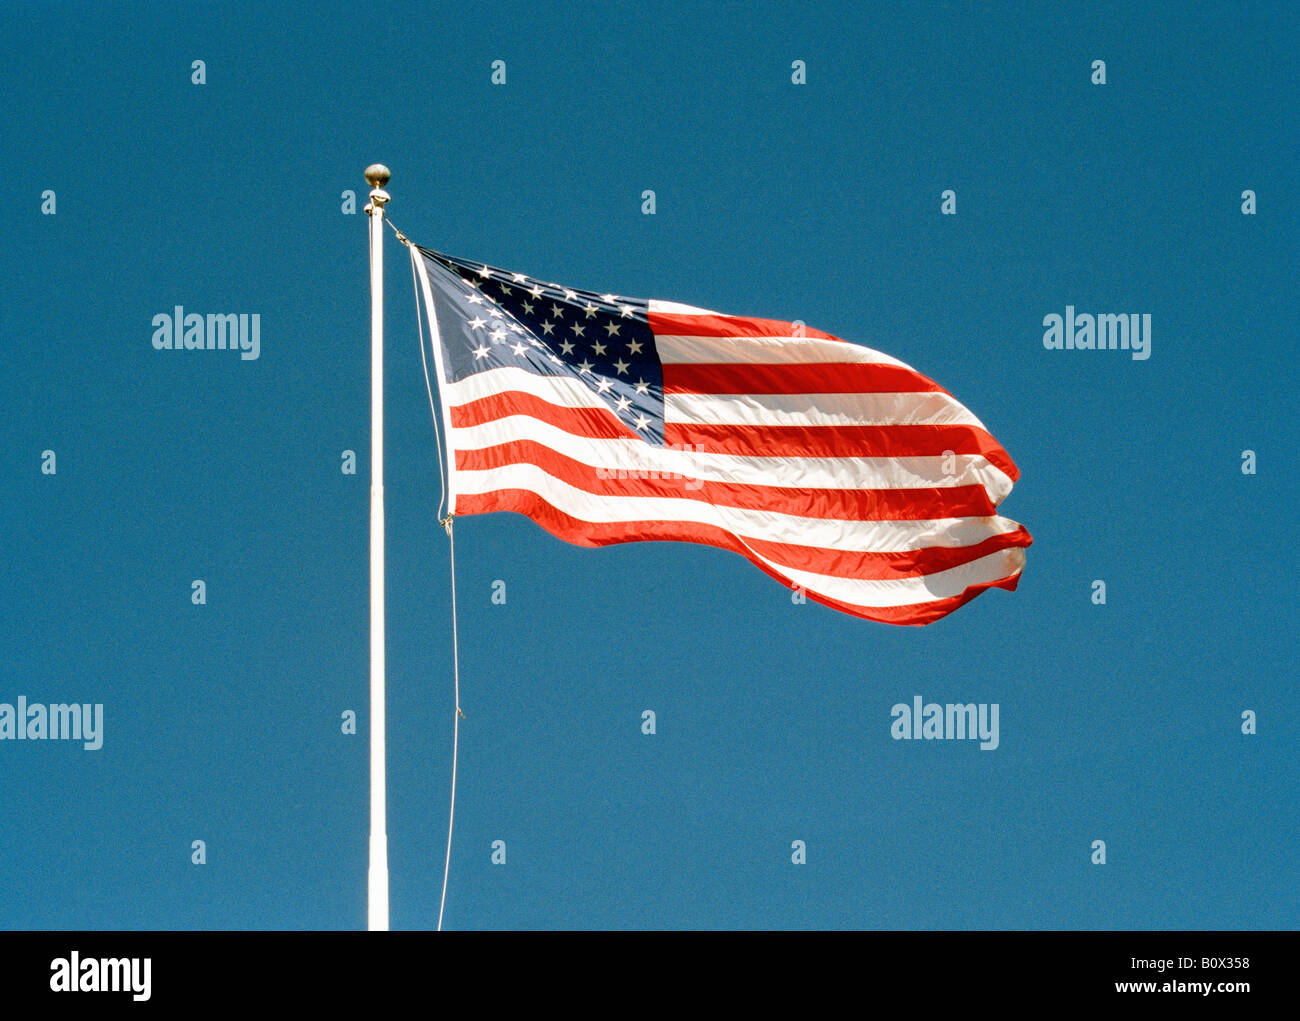 An American flag flying against a clear blue sky Stock Photo